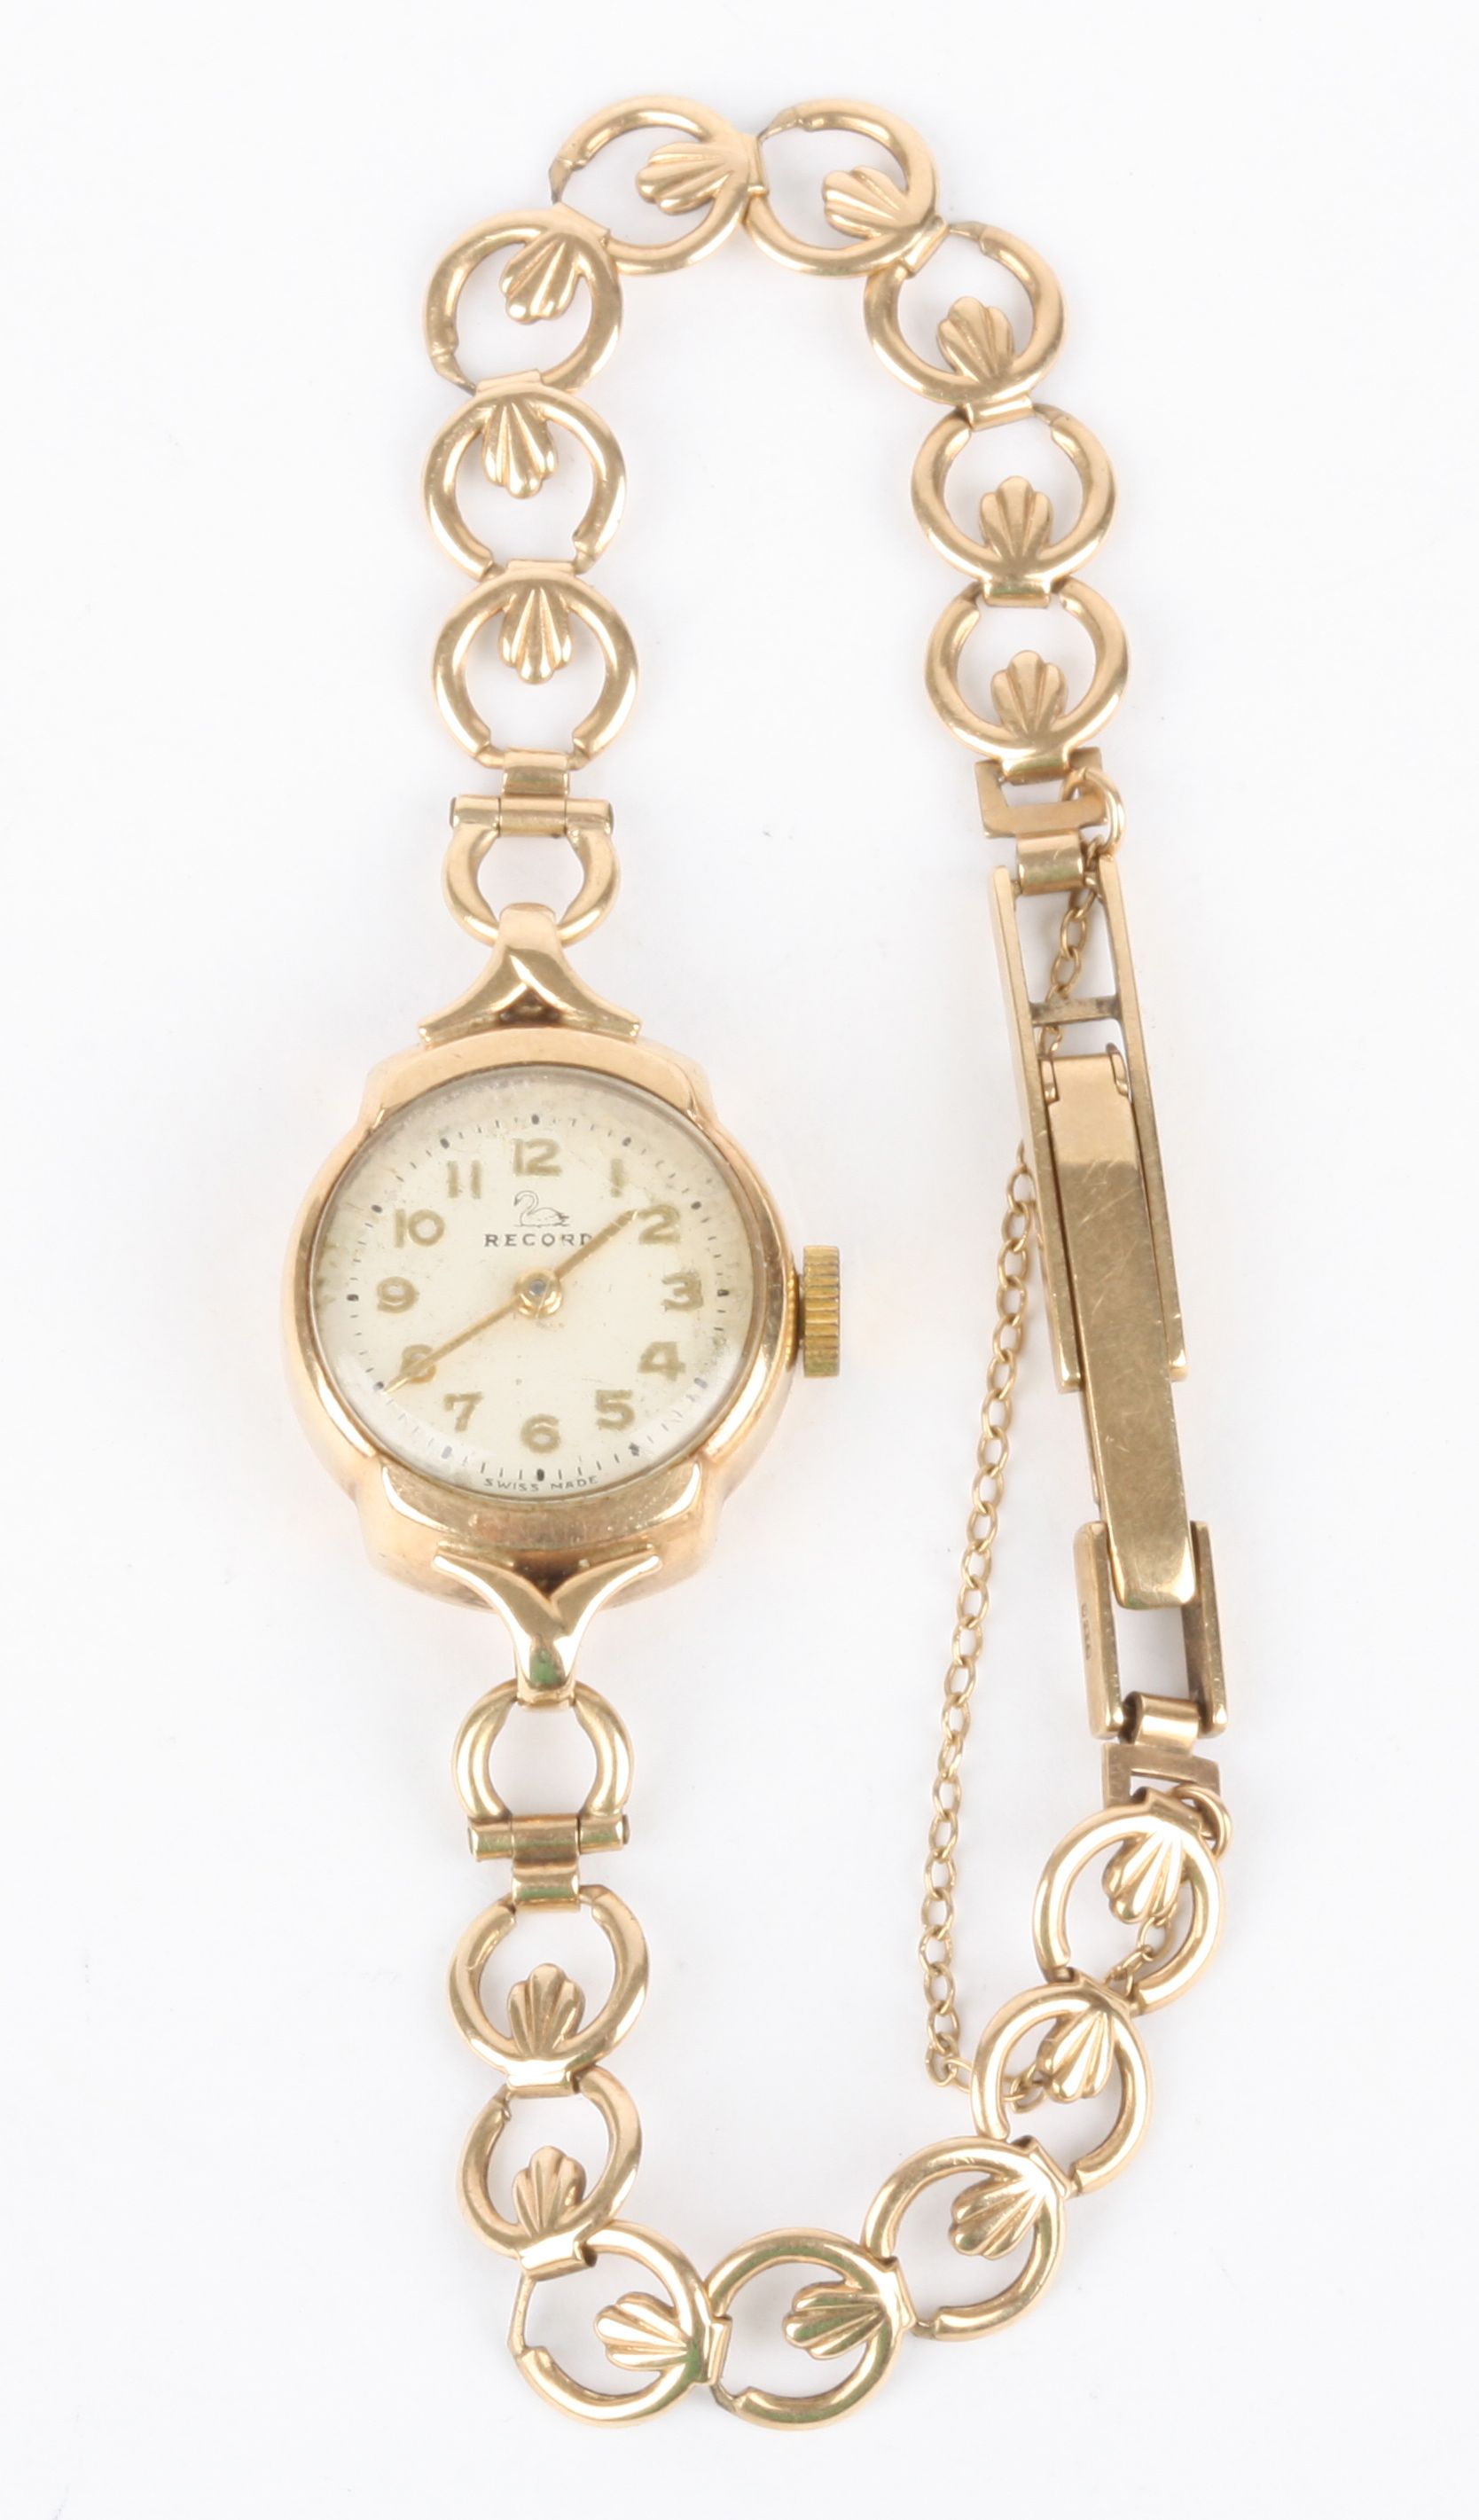 A 9ct gold Record ladies wrist watch with mechanical movement, with ring mounted strap. 8.2 grams